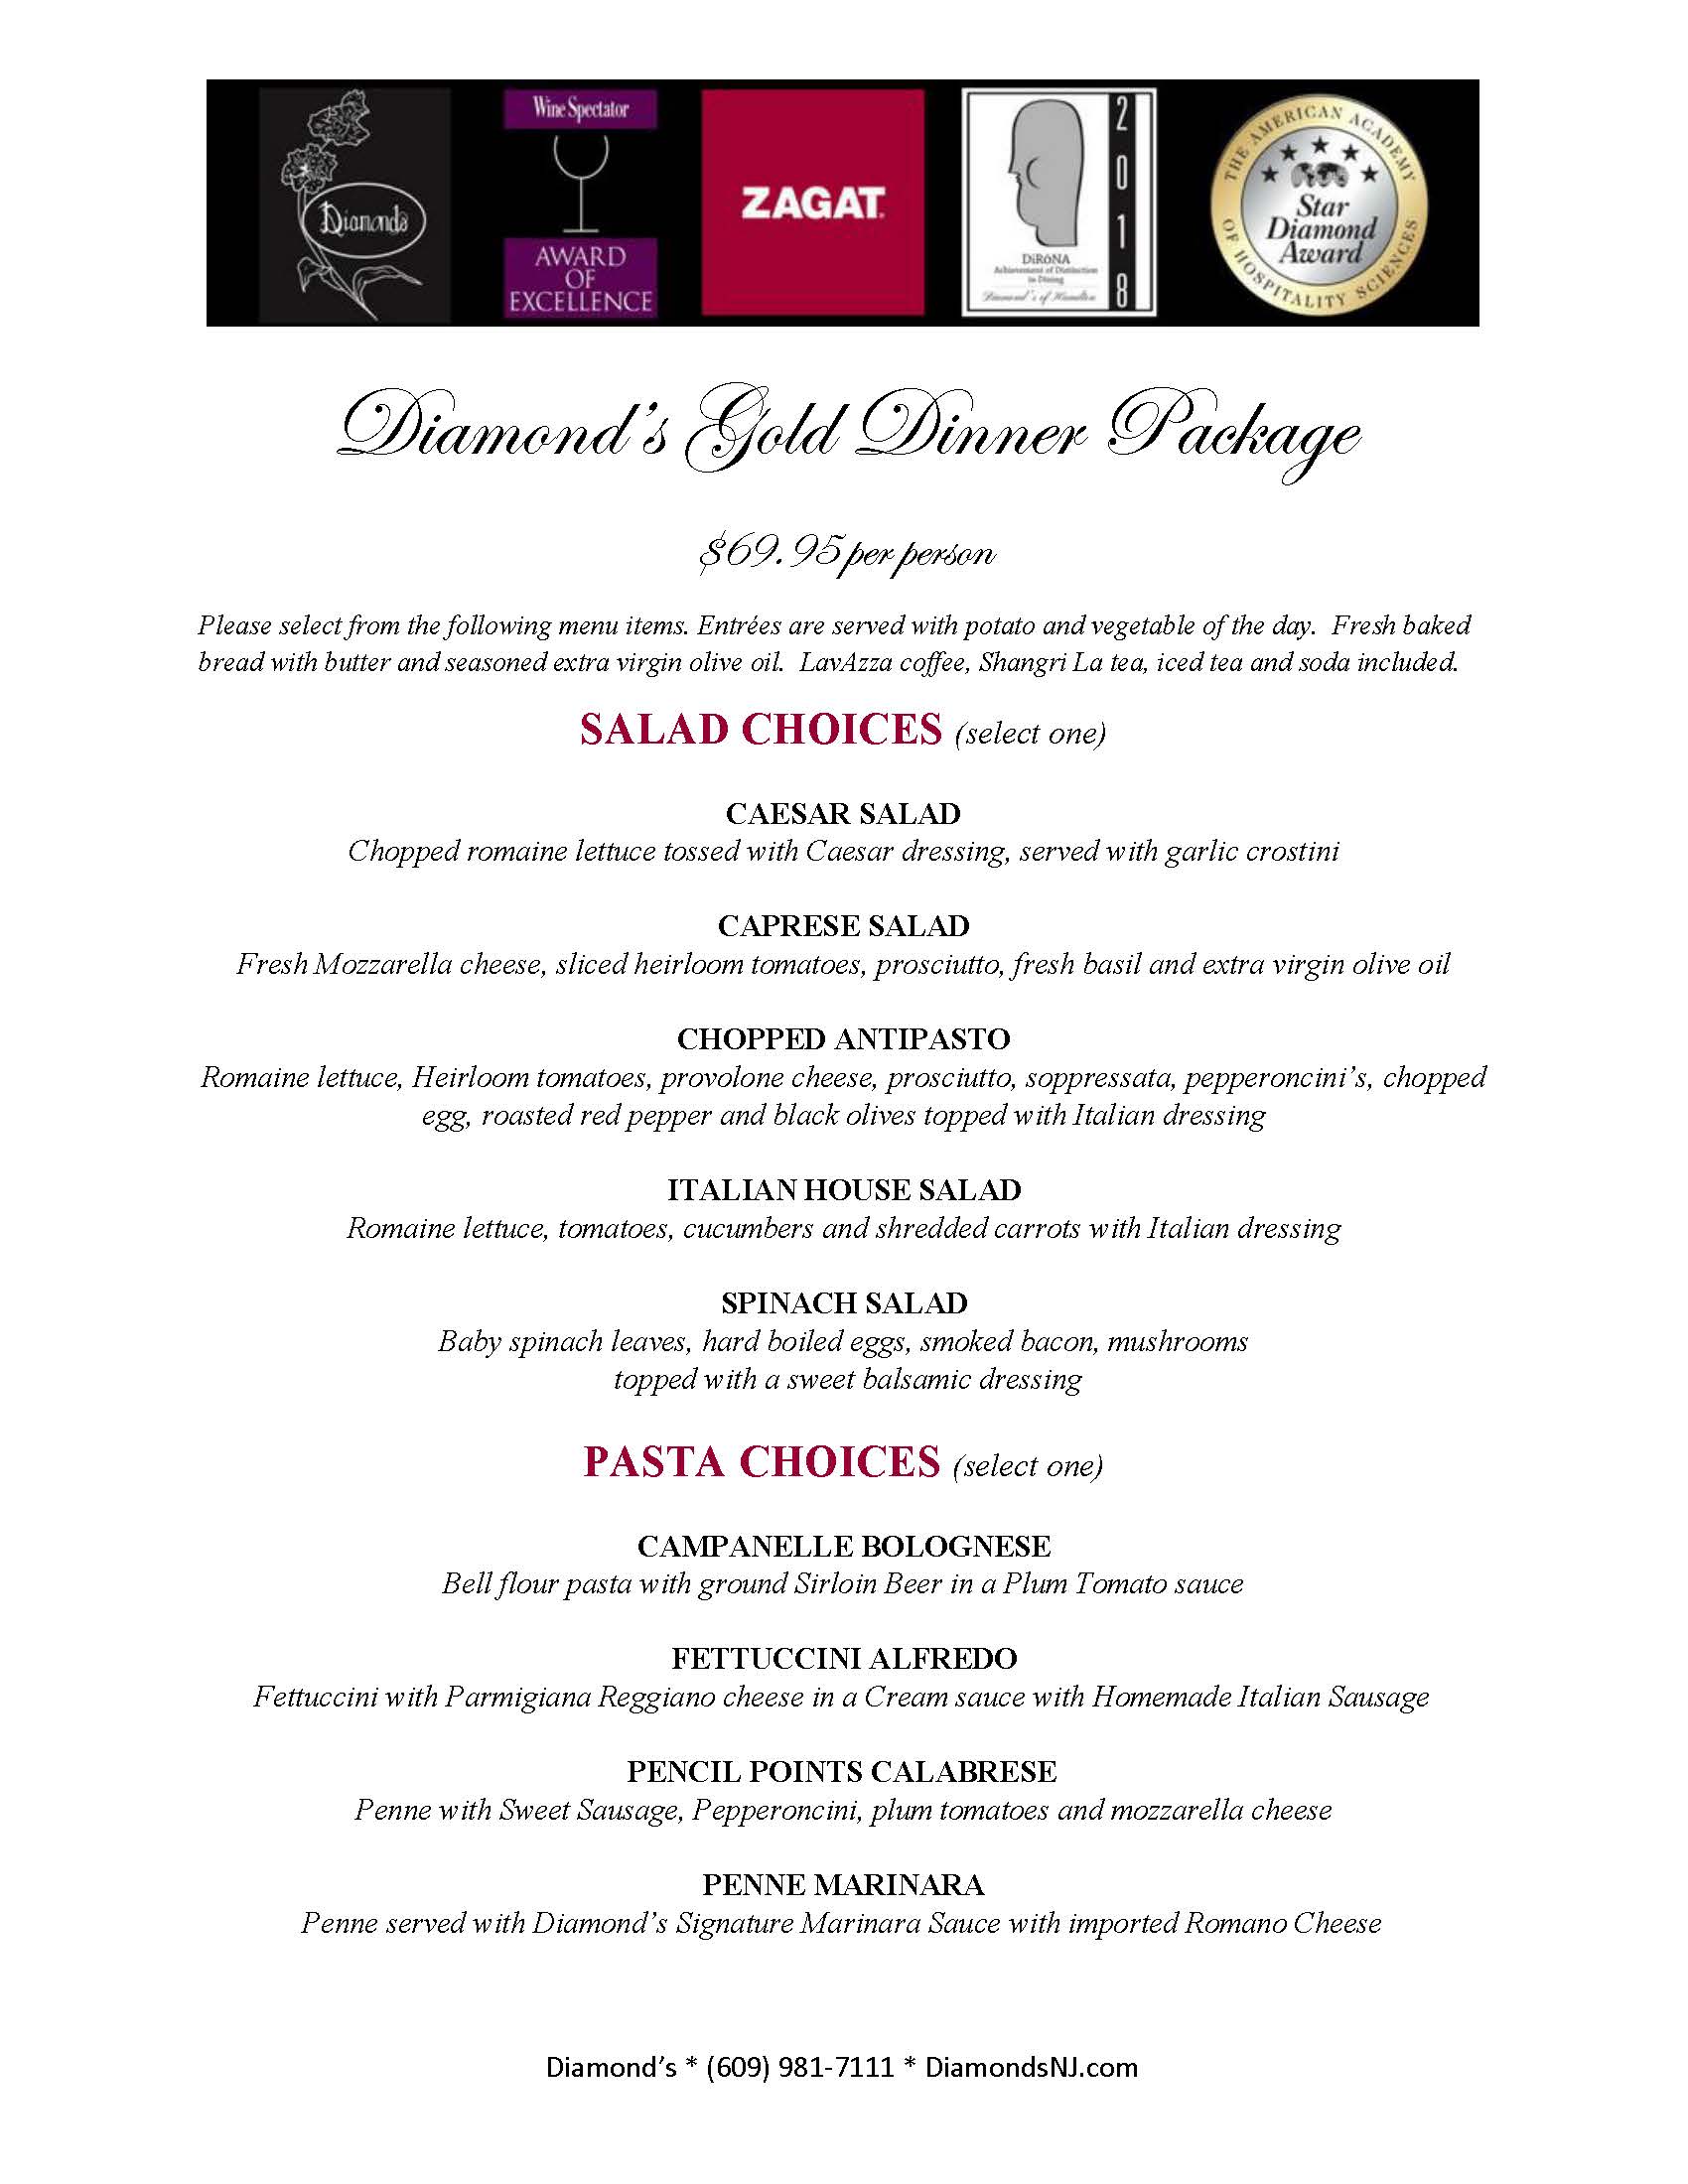 The menu for the diamond's gold dinner package.